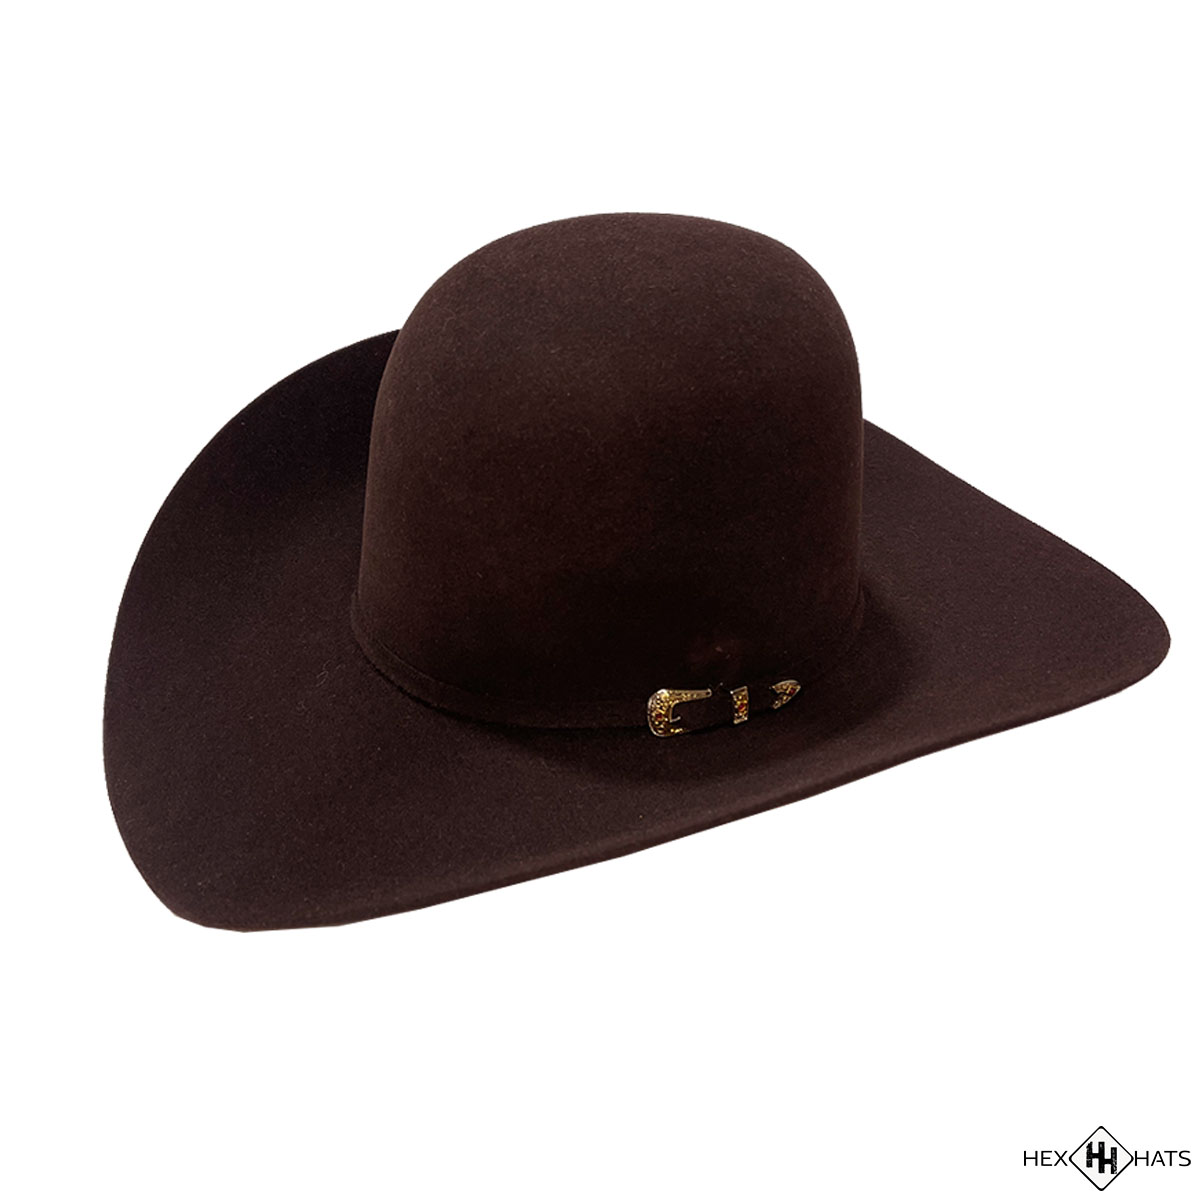 8x Chocolate Cherry Cowboy Hat by Hex Hats Co.